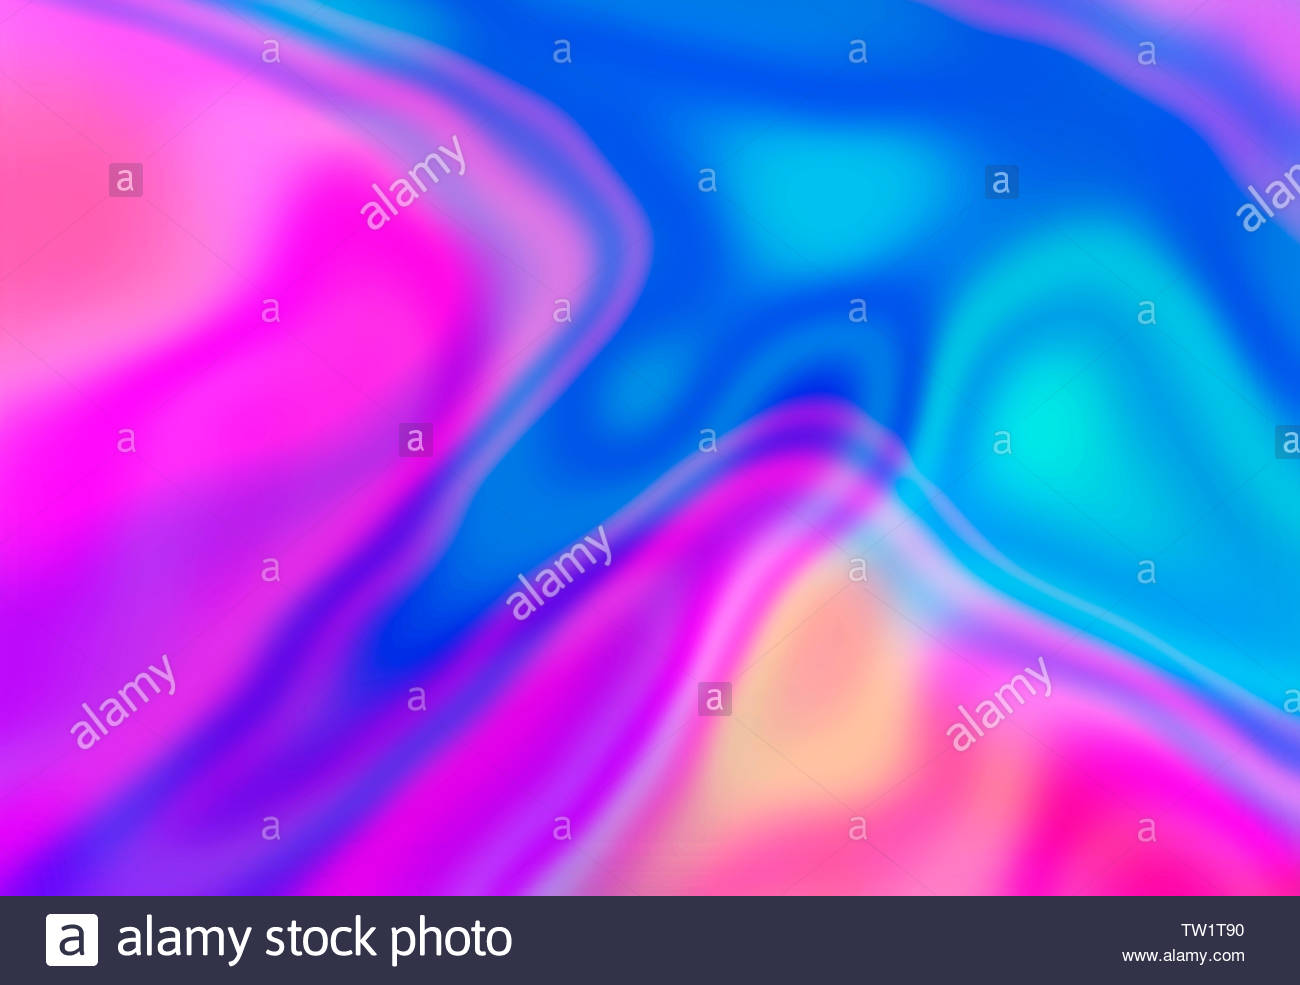 Spectrum Abstract Pulse Vaporwave Background Trendy Colorful